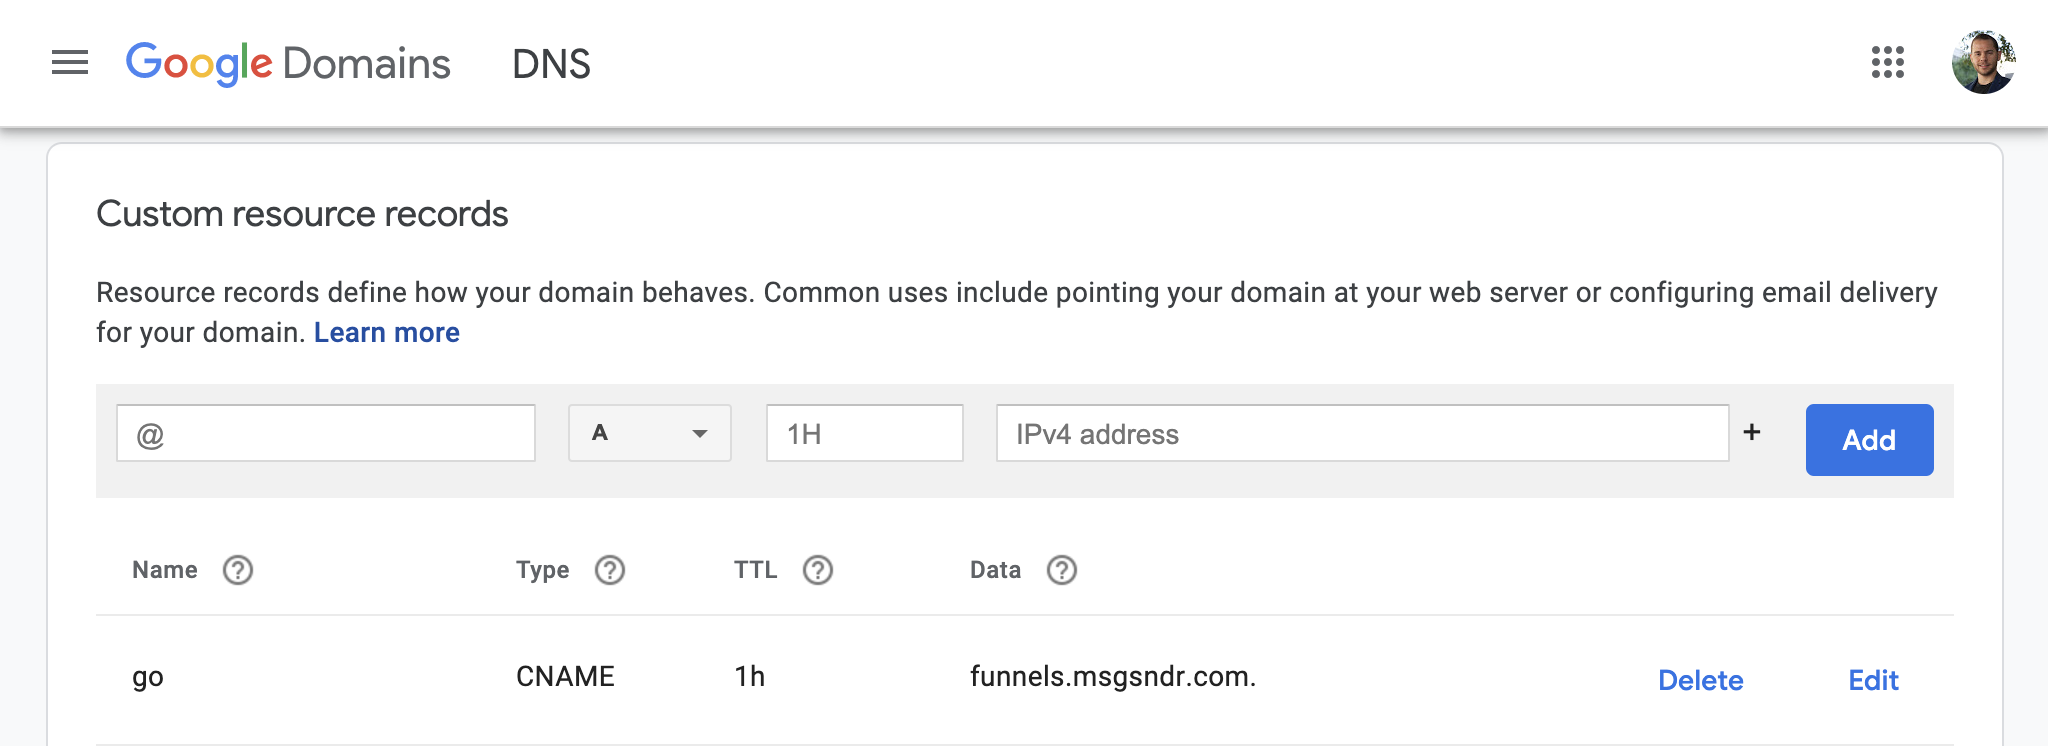 Google Domains with a subdomain CNAME set to funnels.msgsndr.com